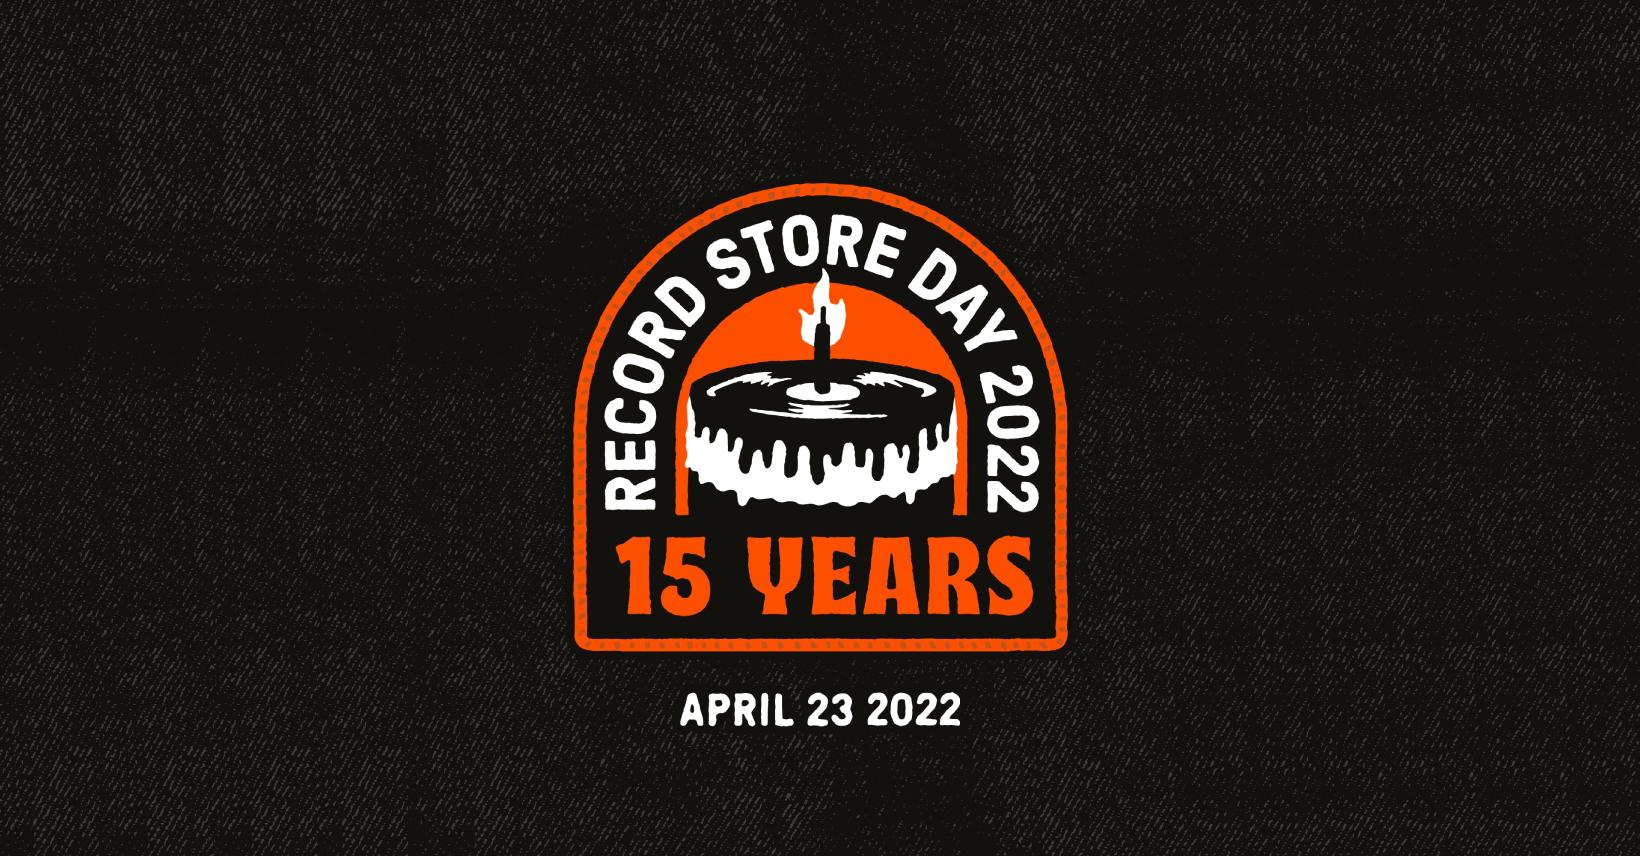 The Record Store Day Logo, with a record player in the shape of a candle.